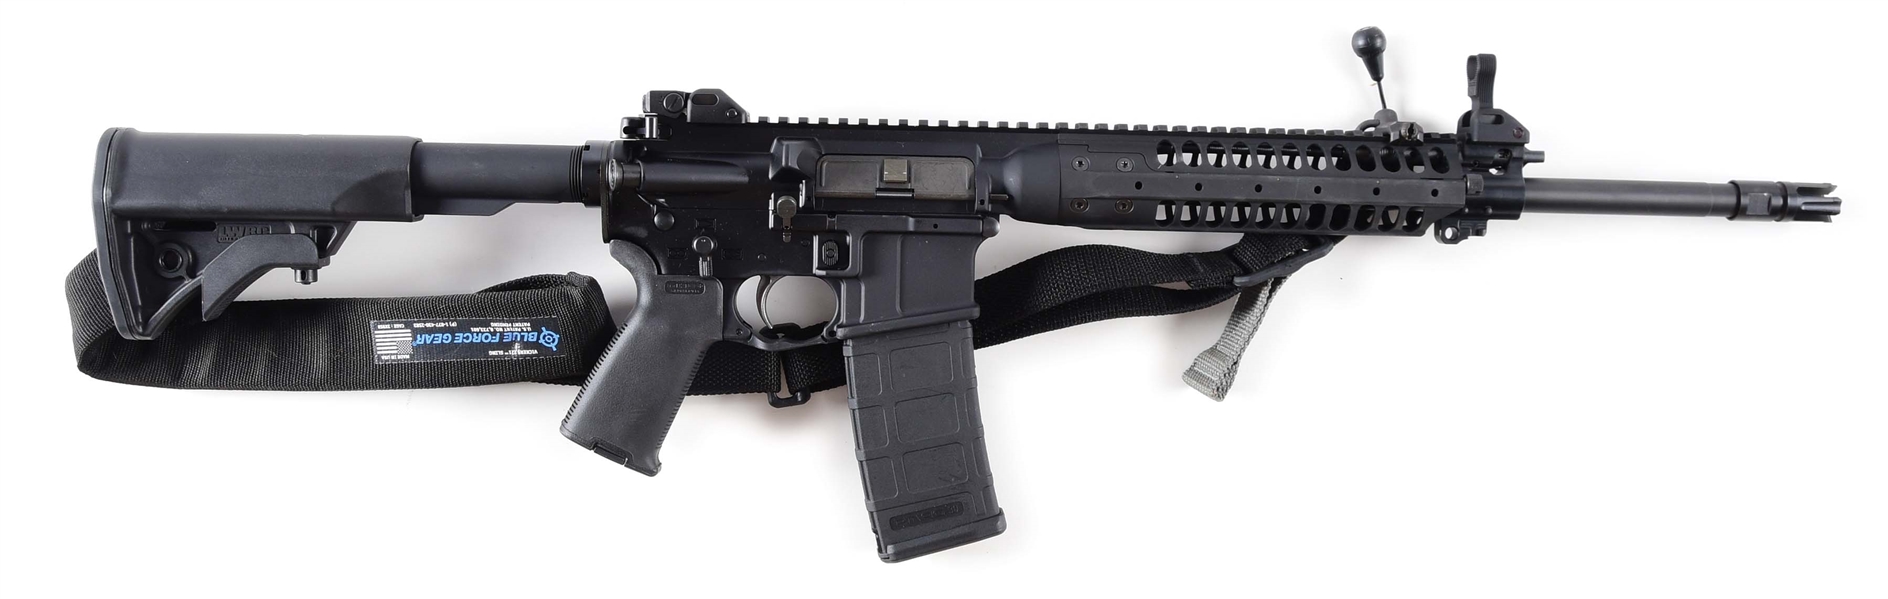 (M) LWRC M6A2IC SEMI-AUTOMATIC RIFLE WITH MAGAZINES AND ACCESSORIES.